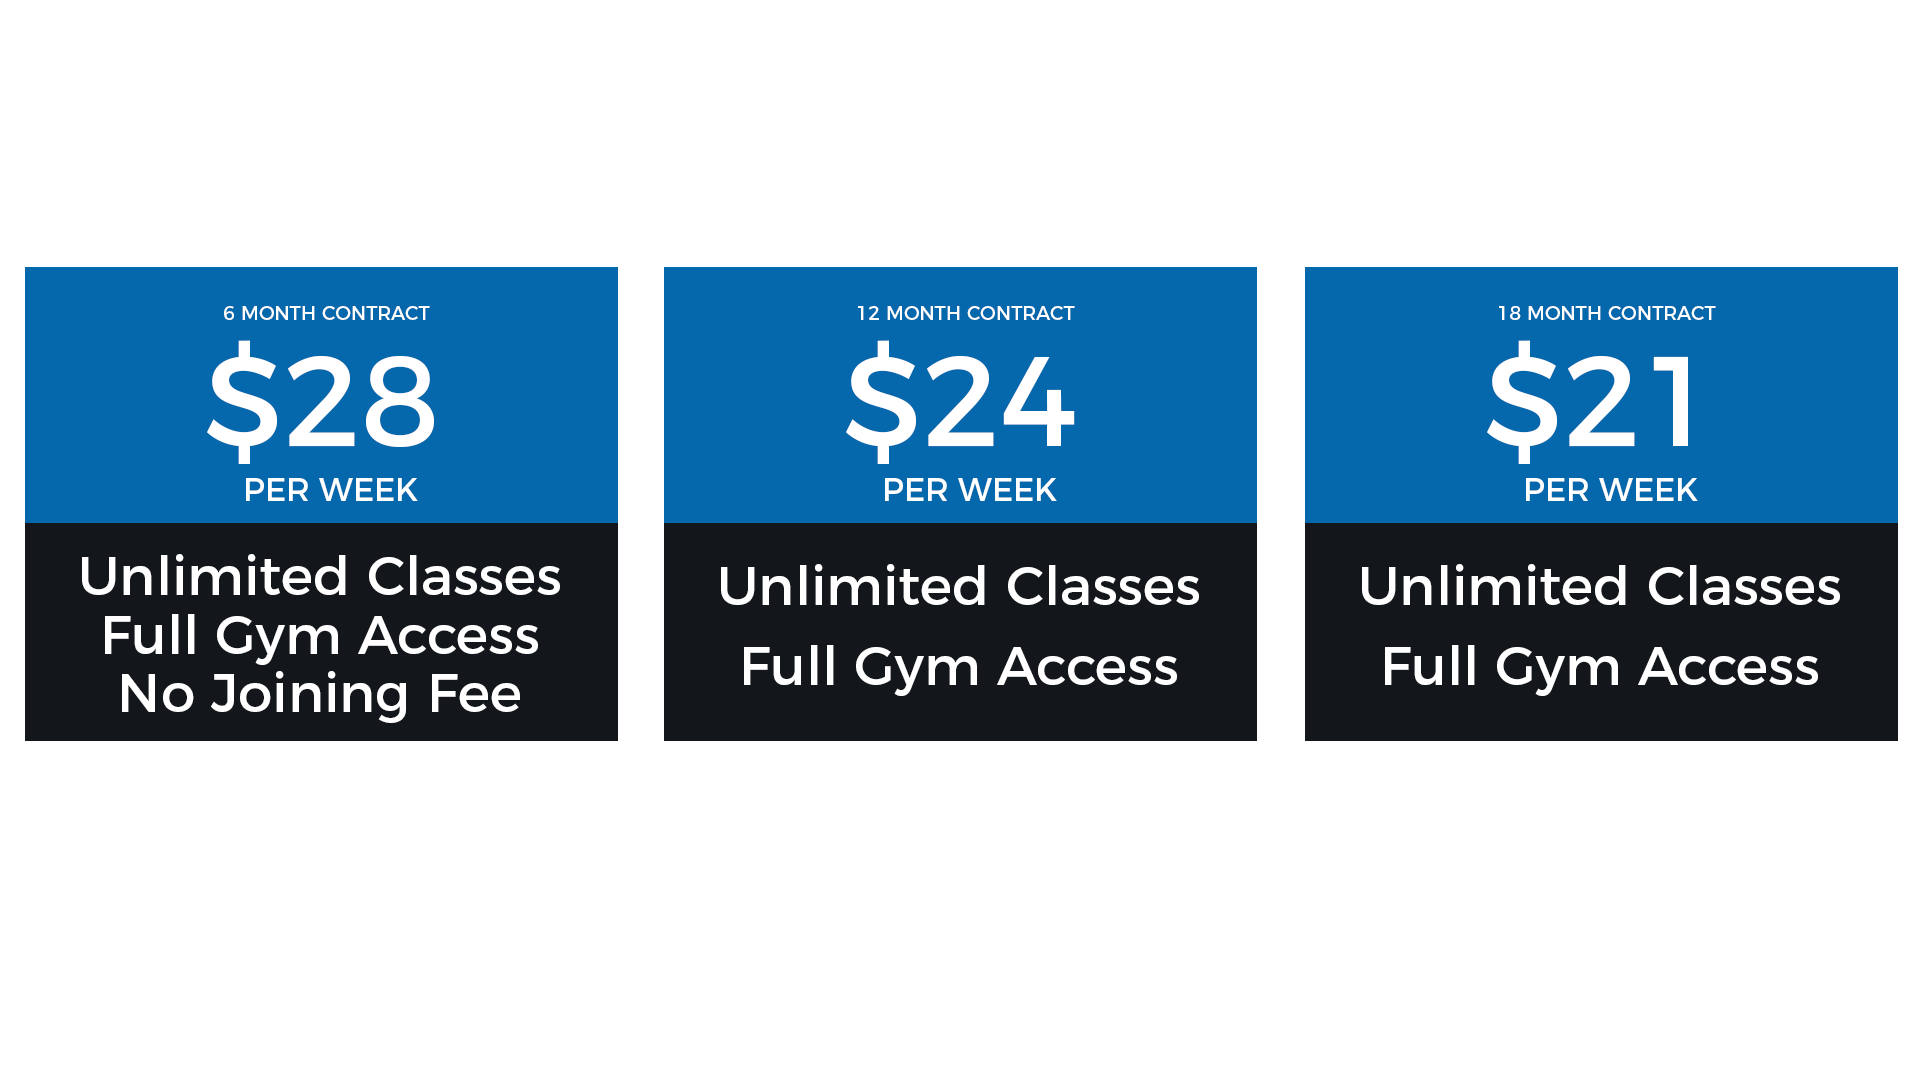 https://urbansport.co.nz/wp-content/uploads/2019/06/Pricing-Tabs-2-1920x1080.png